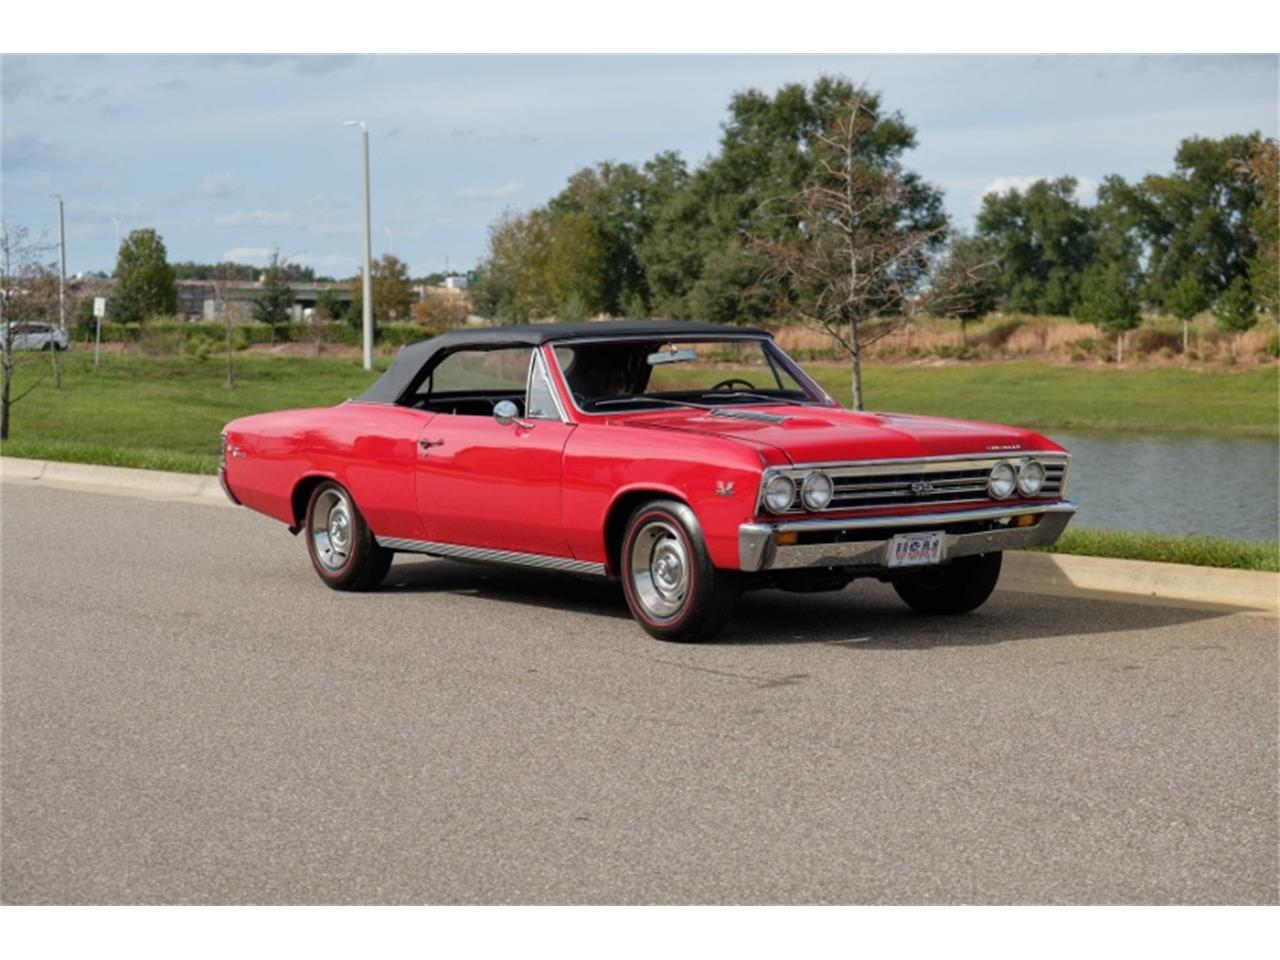 For Sale: 1967 Chevrolet Chevelle in Hobart, Indiana for sale in Hobart, IN